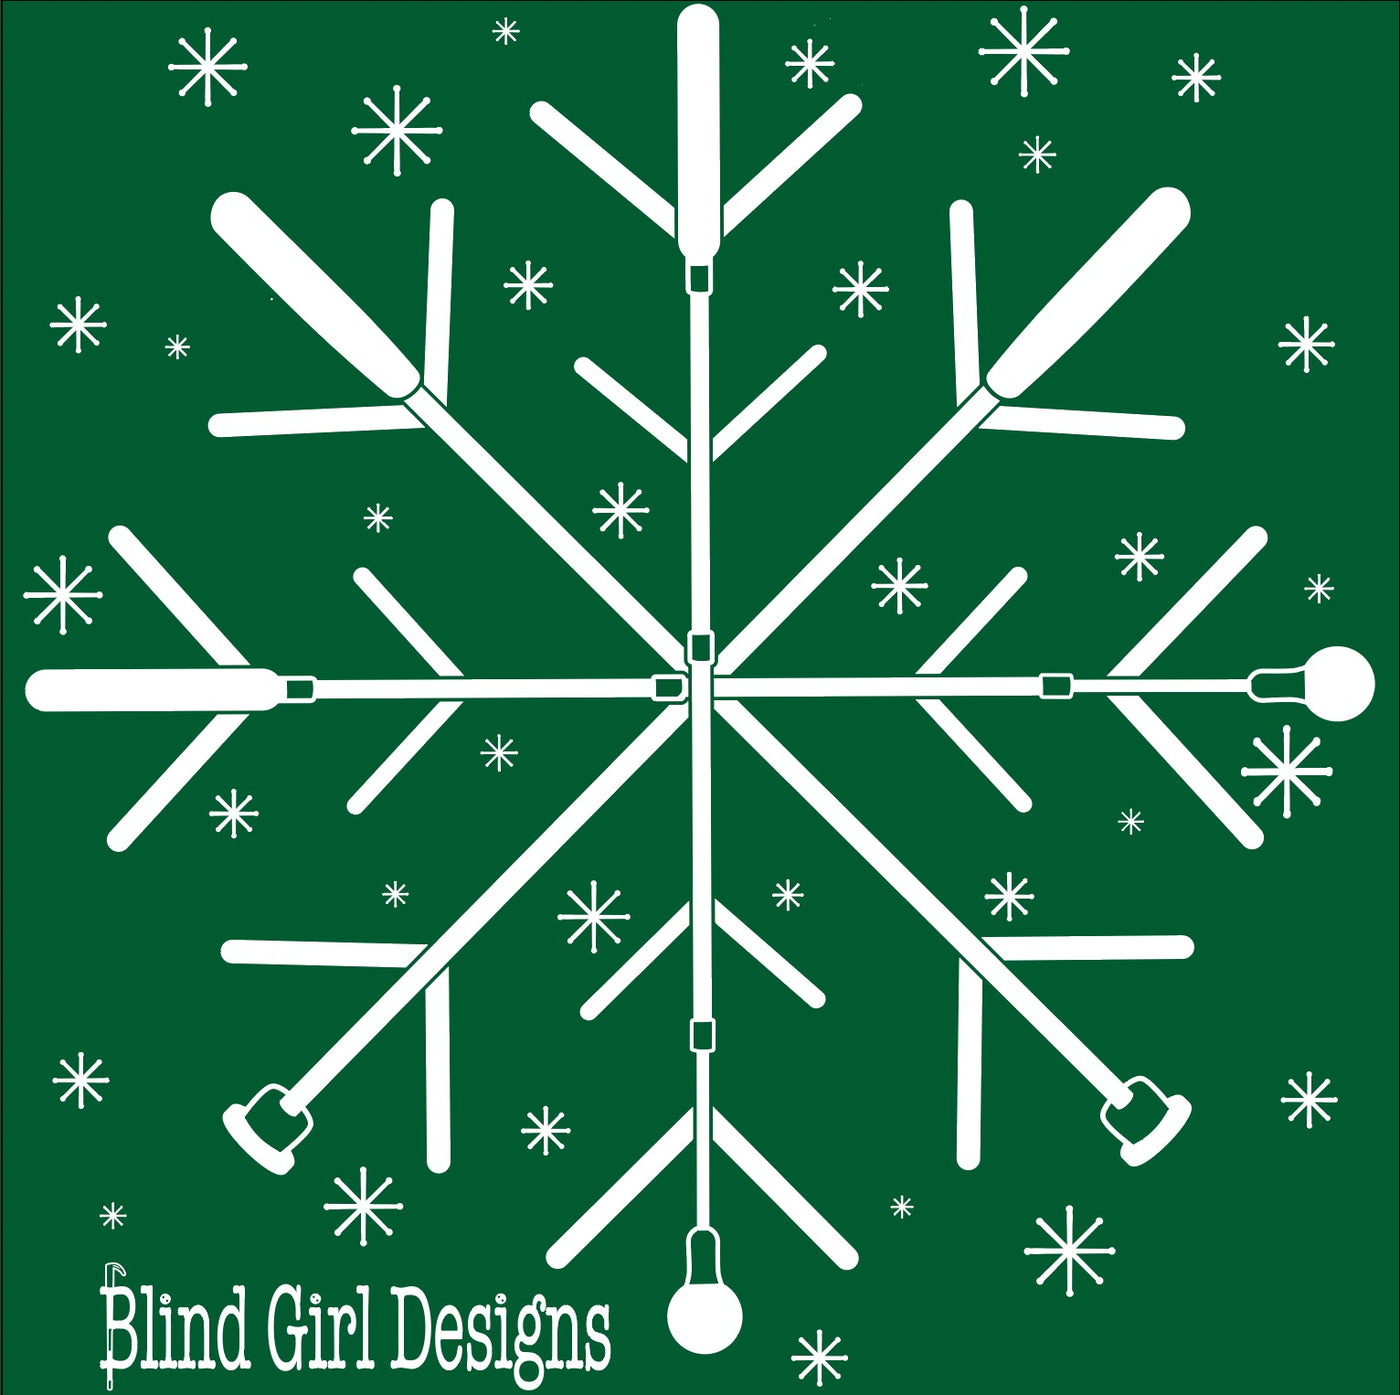 New! 3D Tactile whitecane snowflake  T-Shirt - deep forest  green